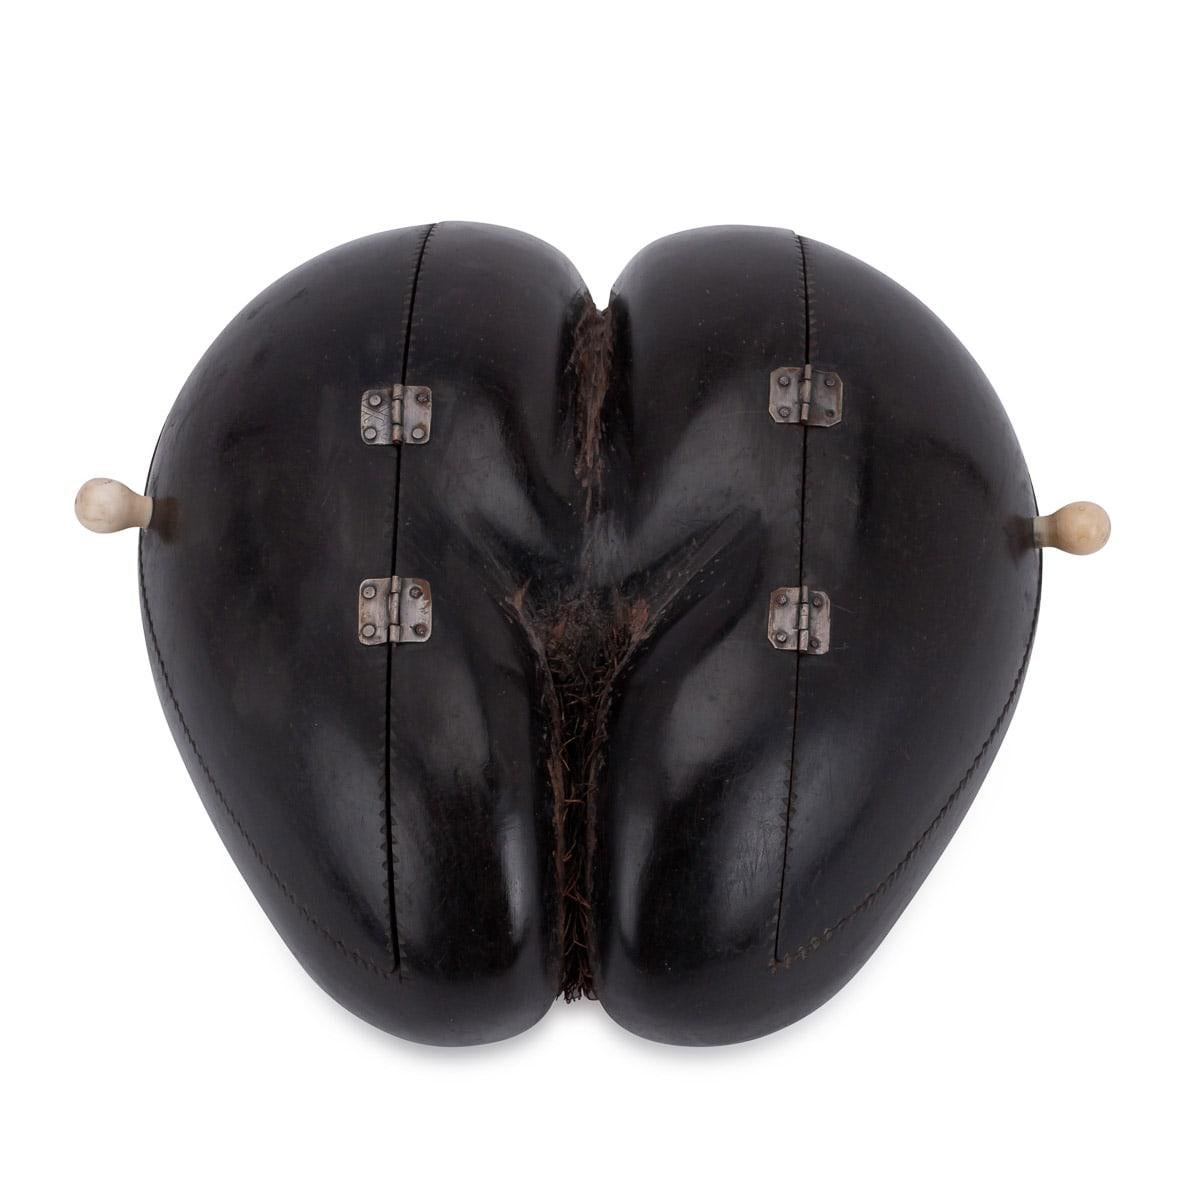 A beautiful coco de mer nut with two hinged compartments open dating to the latter part of the 19th century.
The coco de mer nut (scientific name: Lodoicea )is a very rare seed native to the Seychelles in the Indian Ocean, its suggestive form